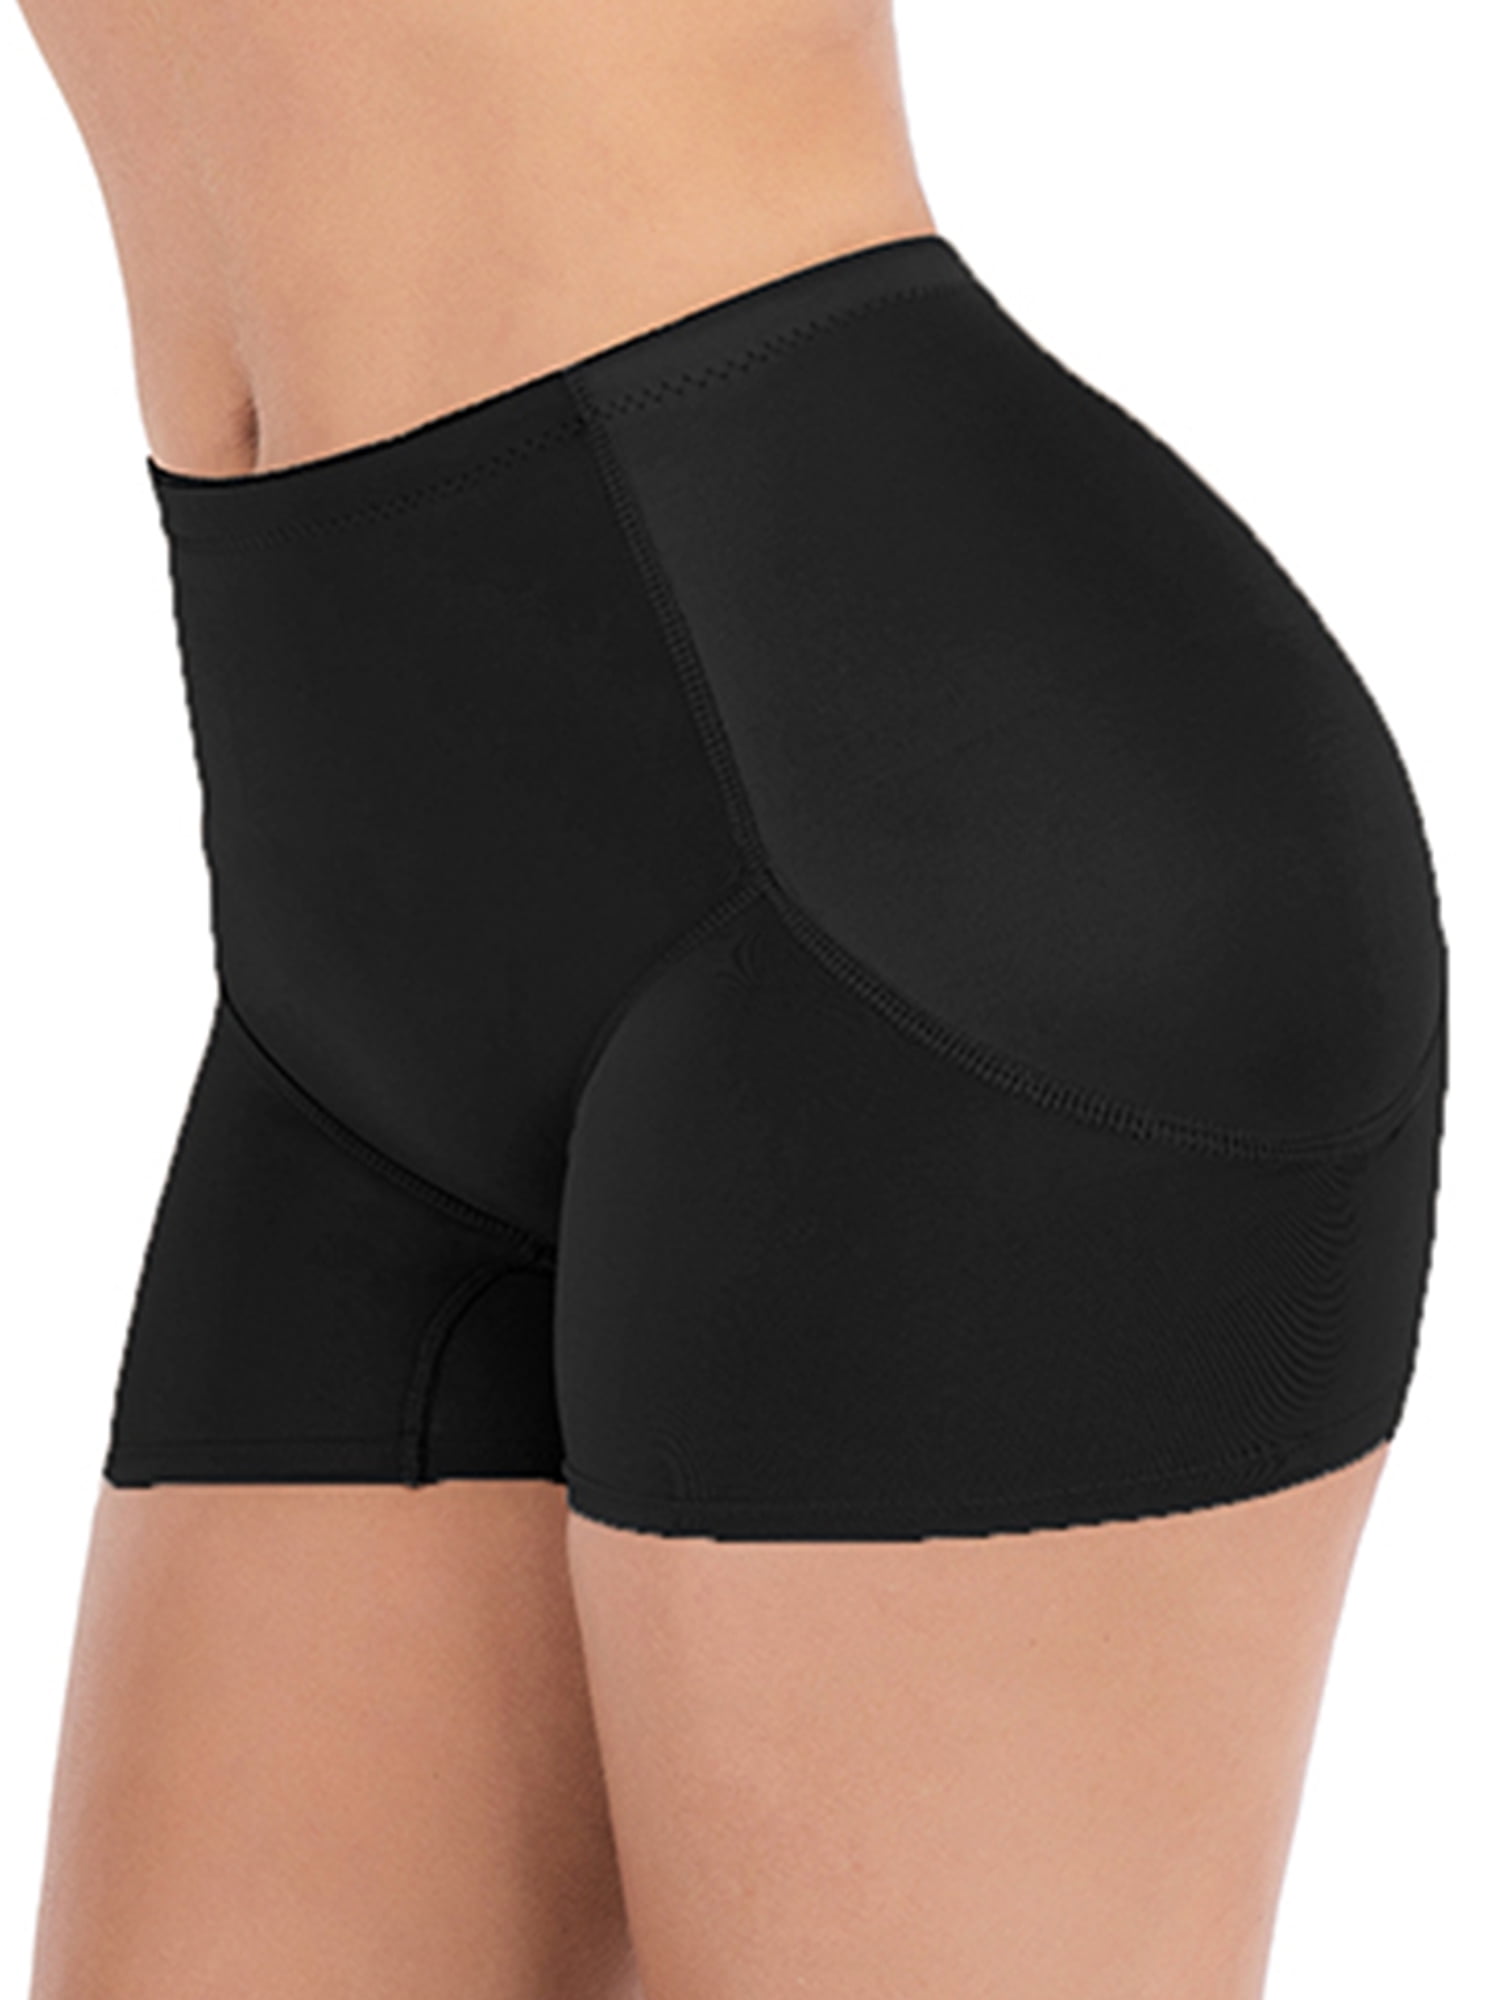 Youloveit Youloveit Women Butt Lifter Panty Padded Enhancing Shapewear Hip Enhancer Sexy